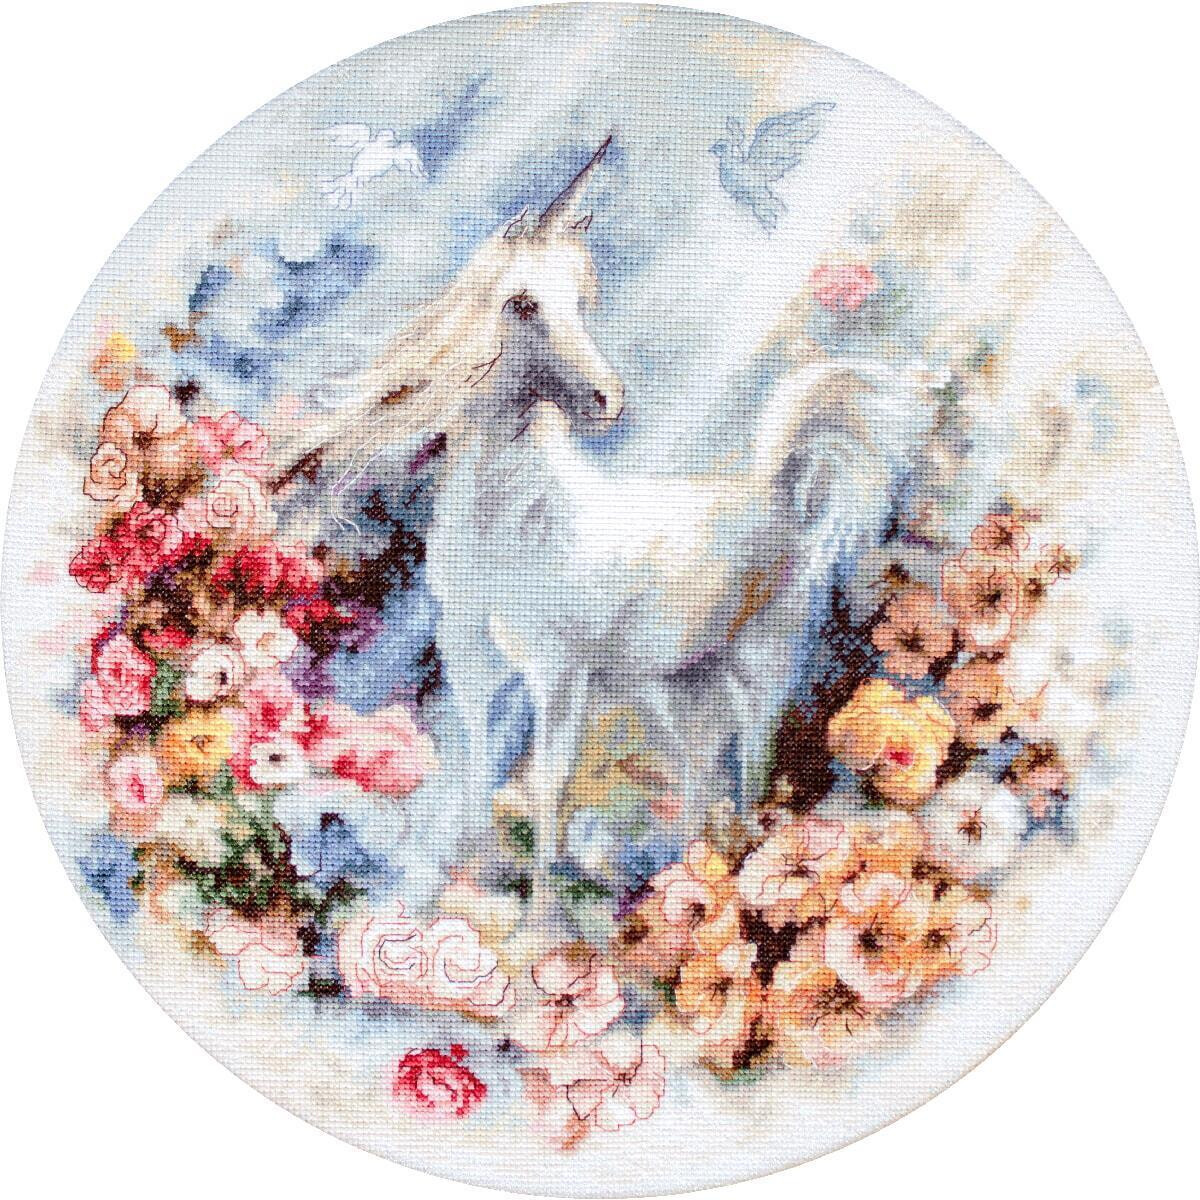 A circular illustration shows a white unicorn with a...